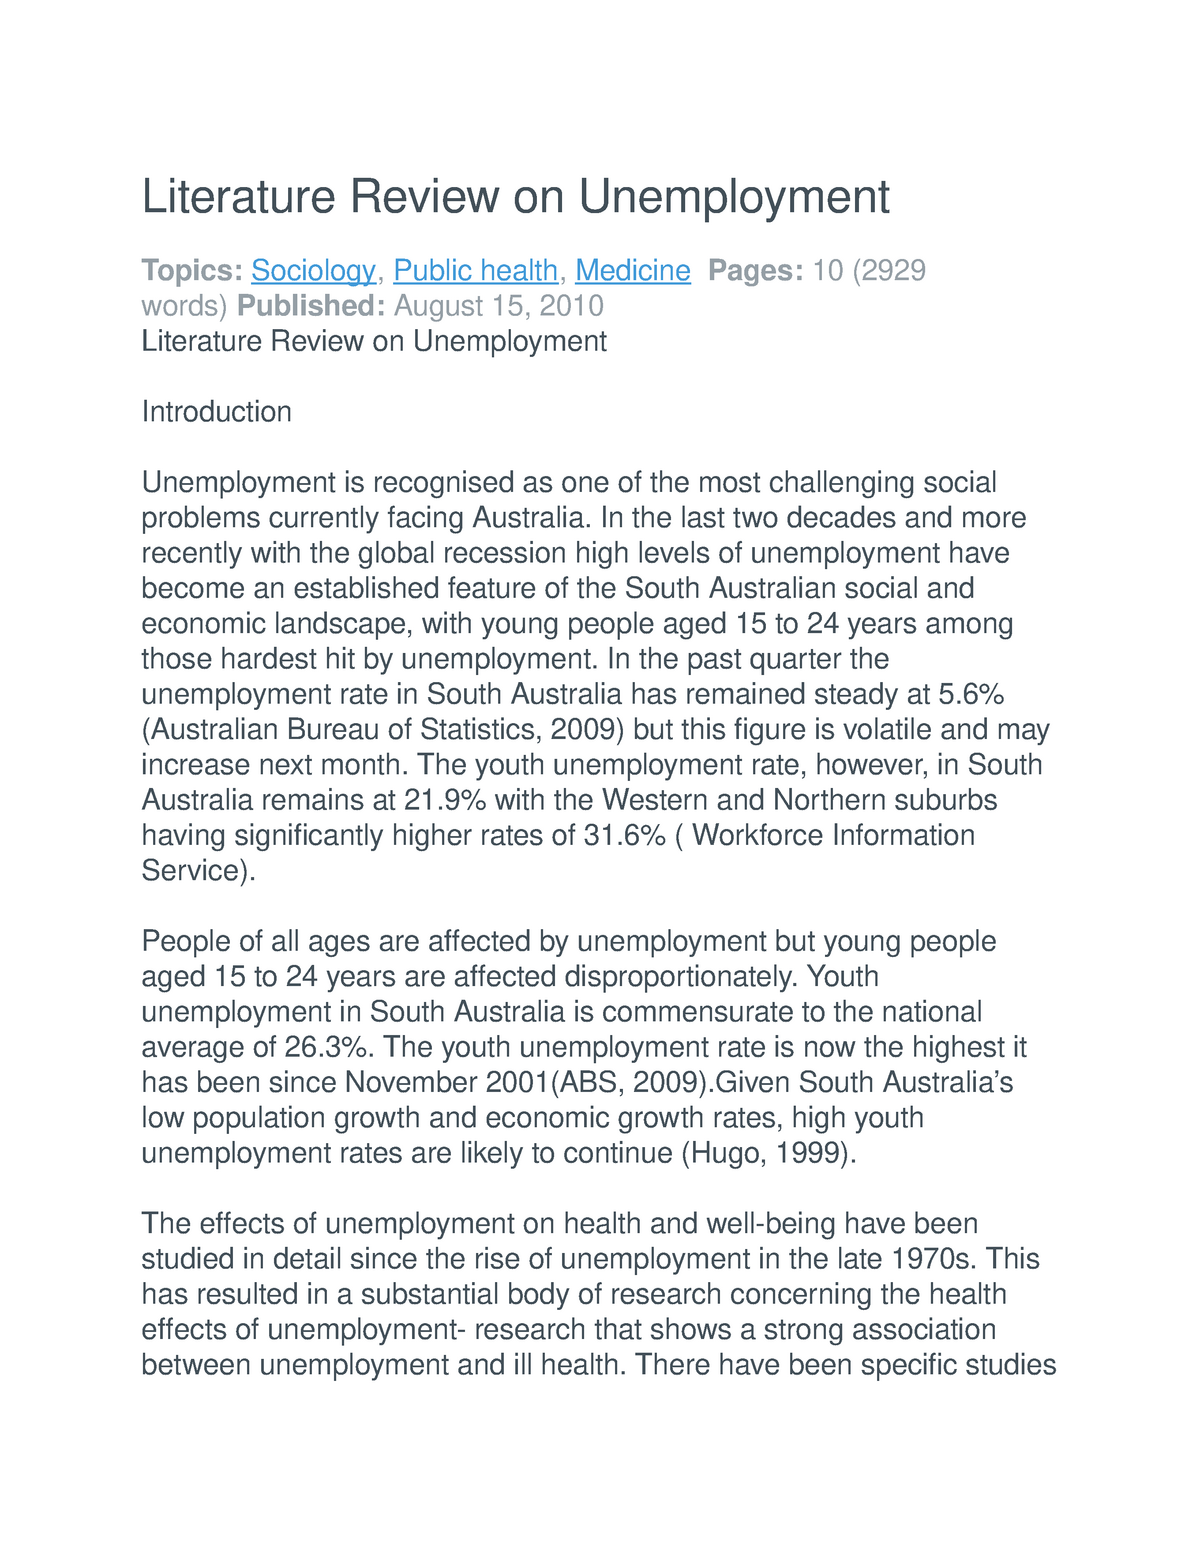 what is literature review of unemployment